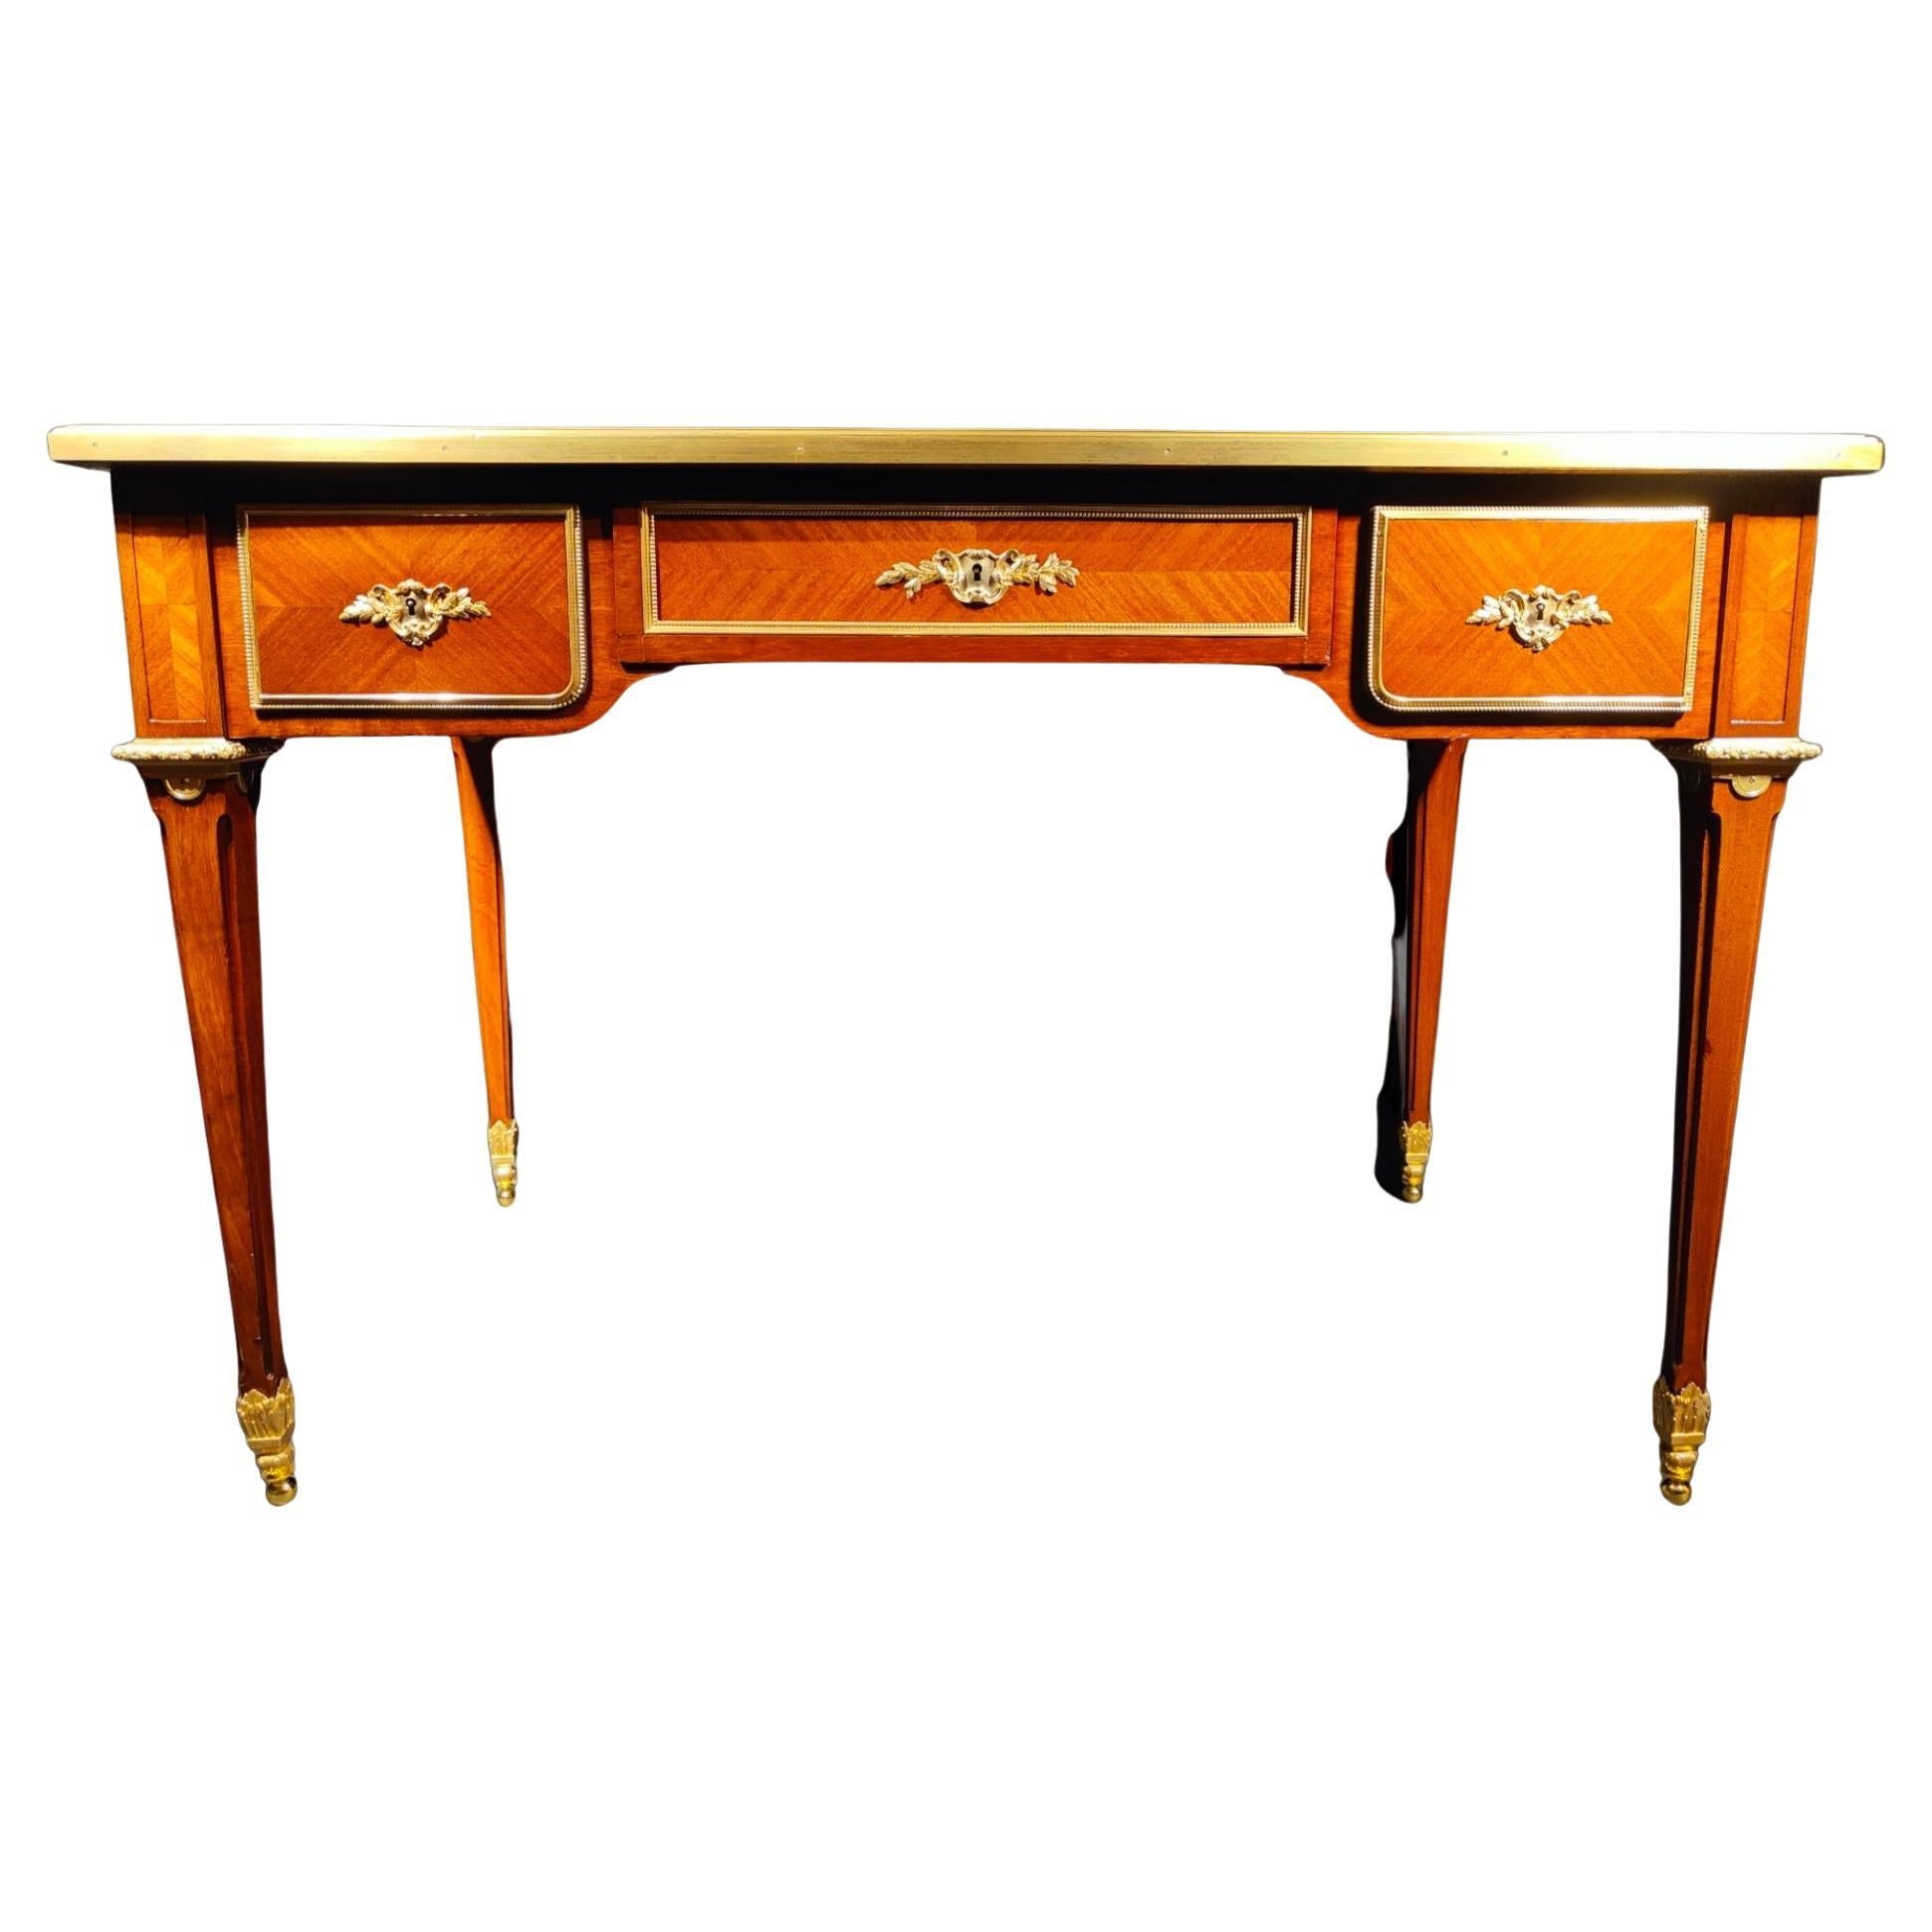 Very Fine Gilt Bronze Mounted Tulipwood and Amaranth Desk by L. Cueunieres For Sale